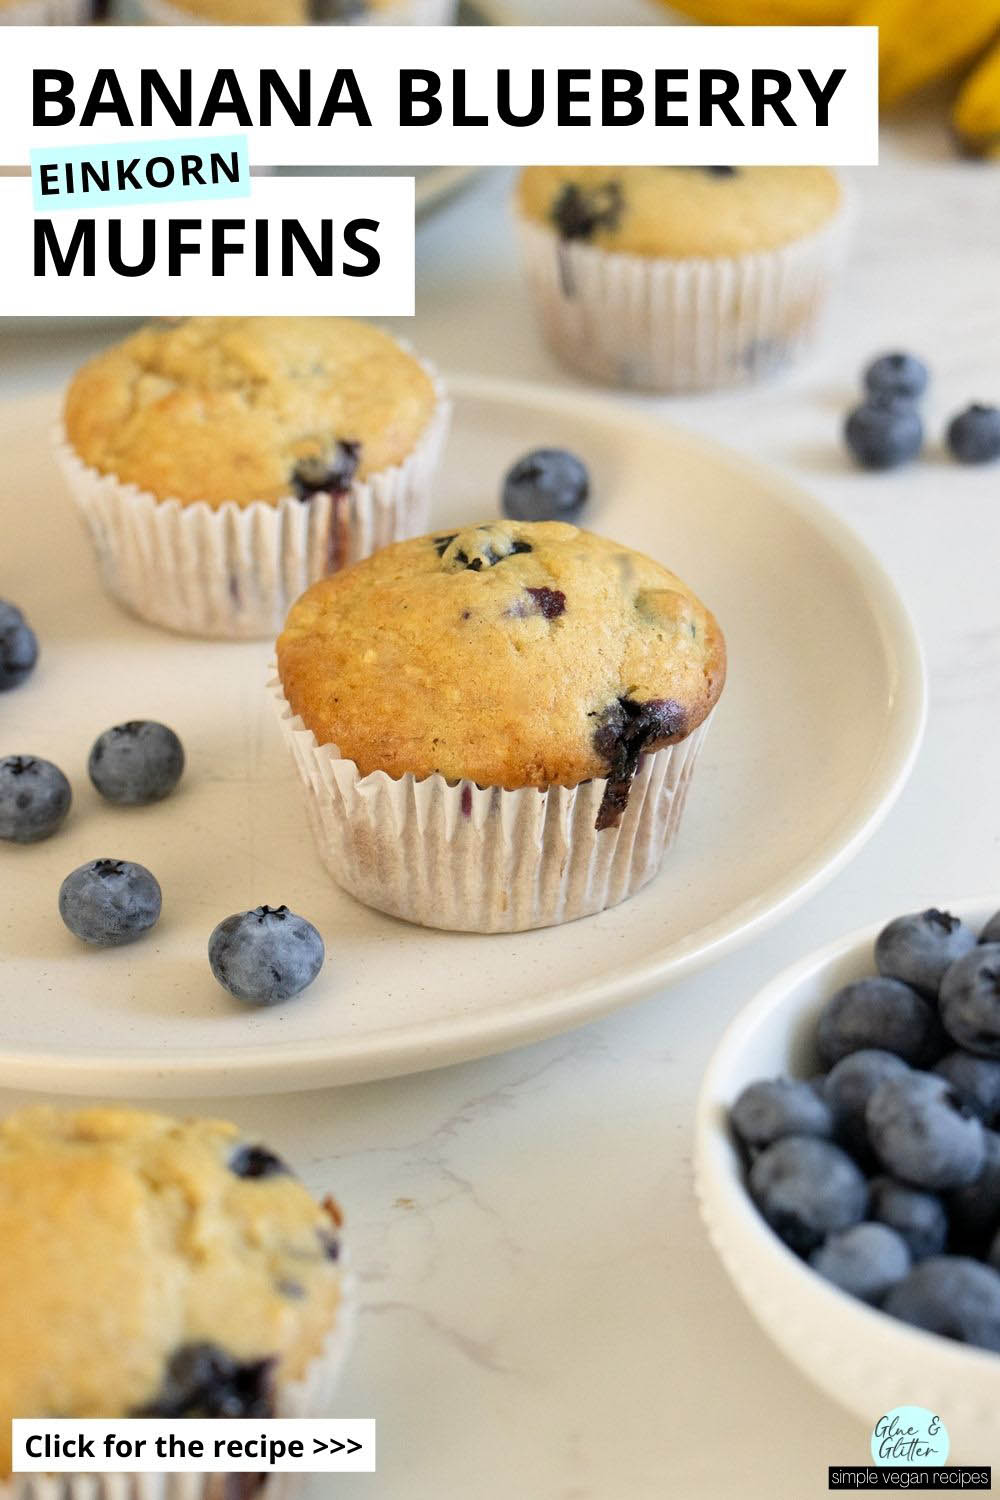 einkorn blueberry muffins plates with blueberries and bananas on the table around them, text overlay